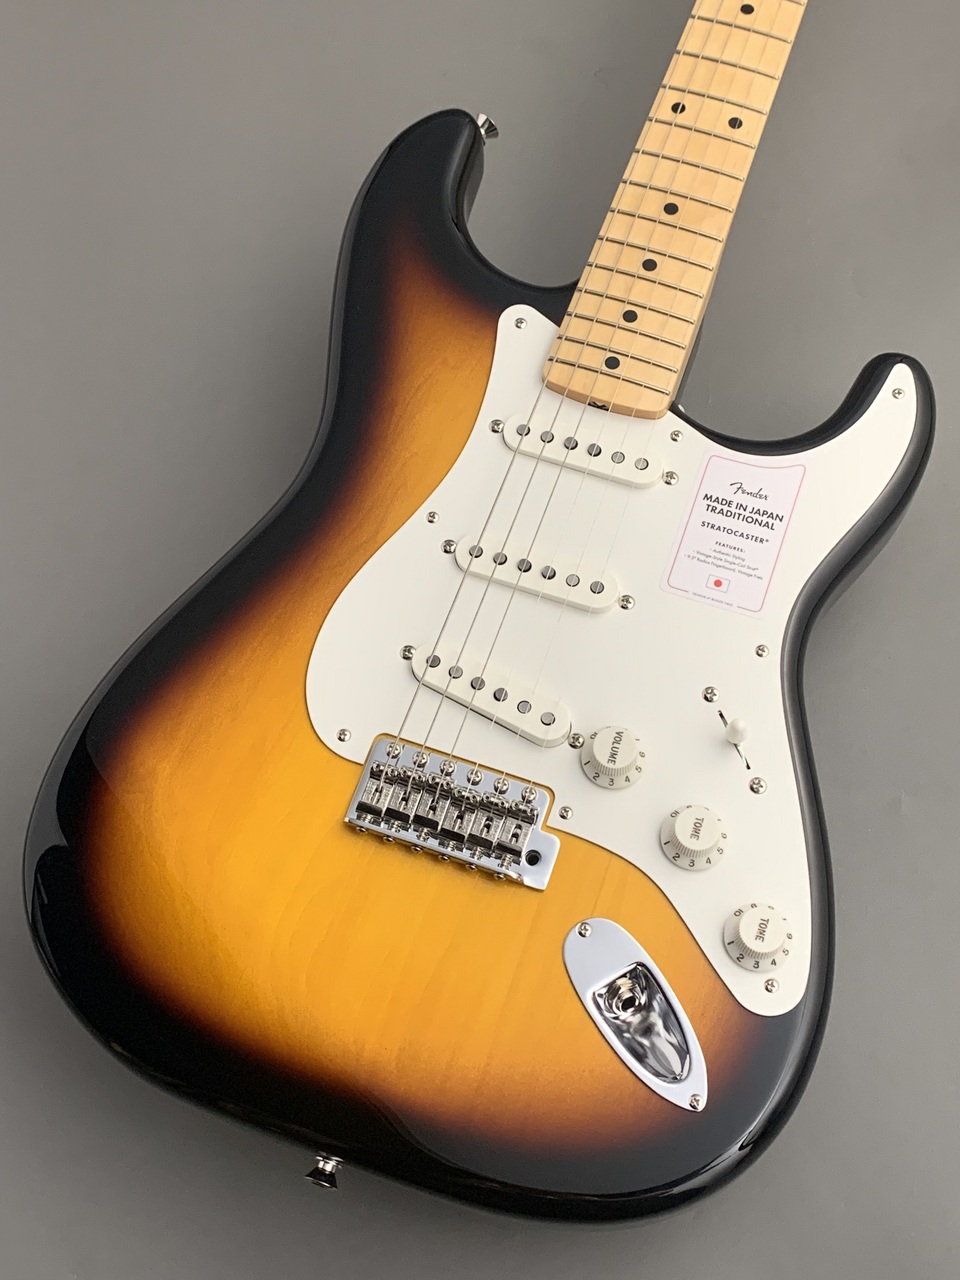 Squier by Fender Stratocaster mod. 日本製